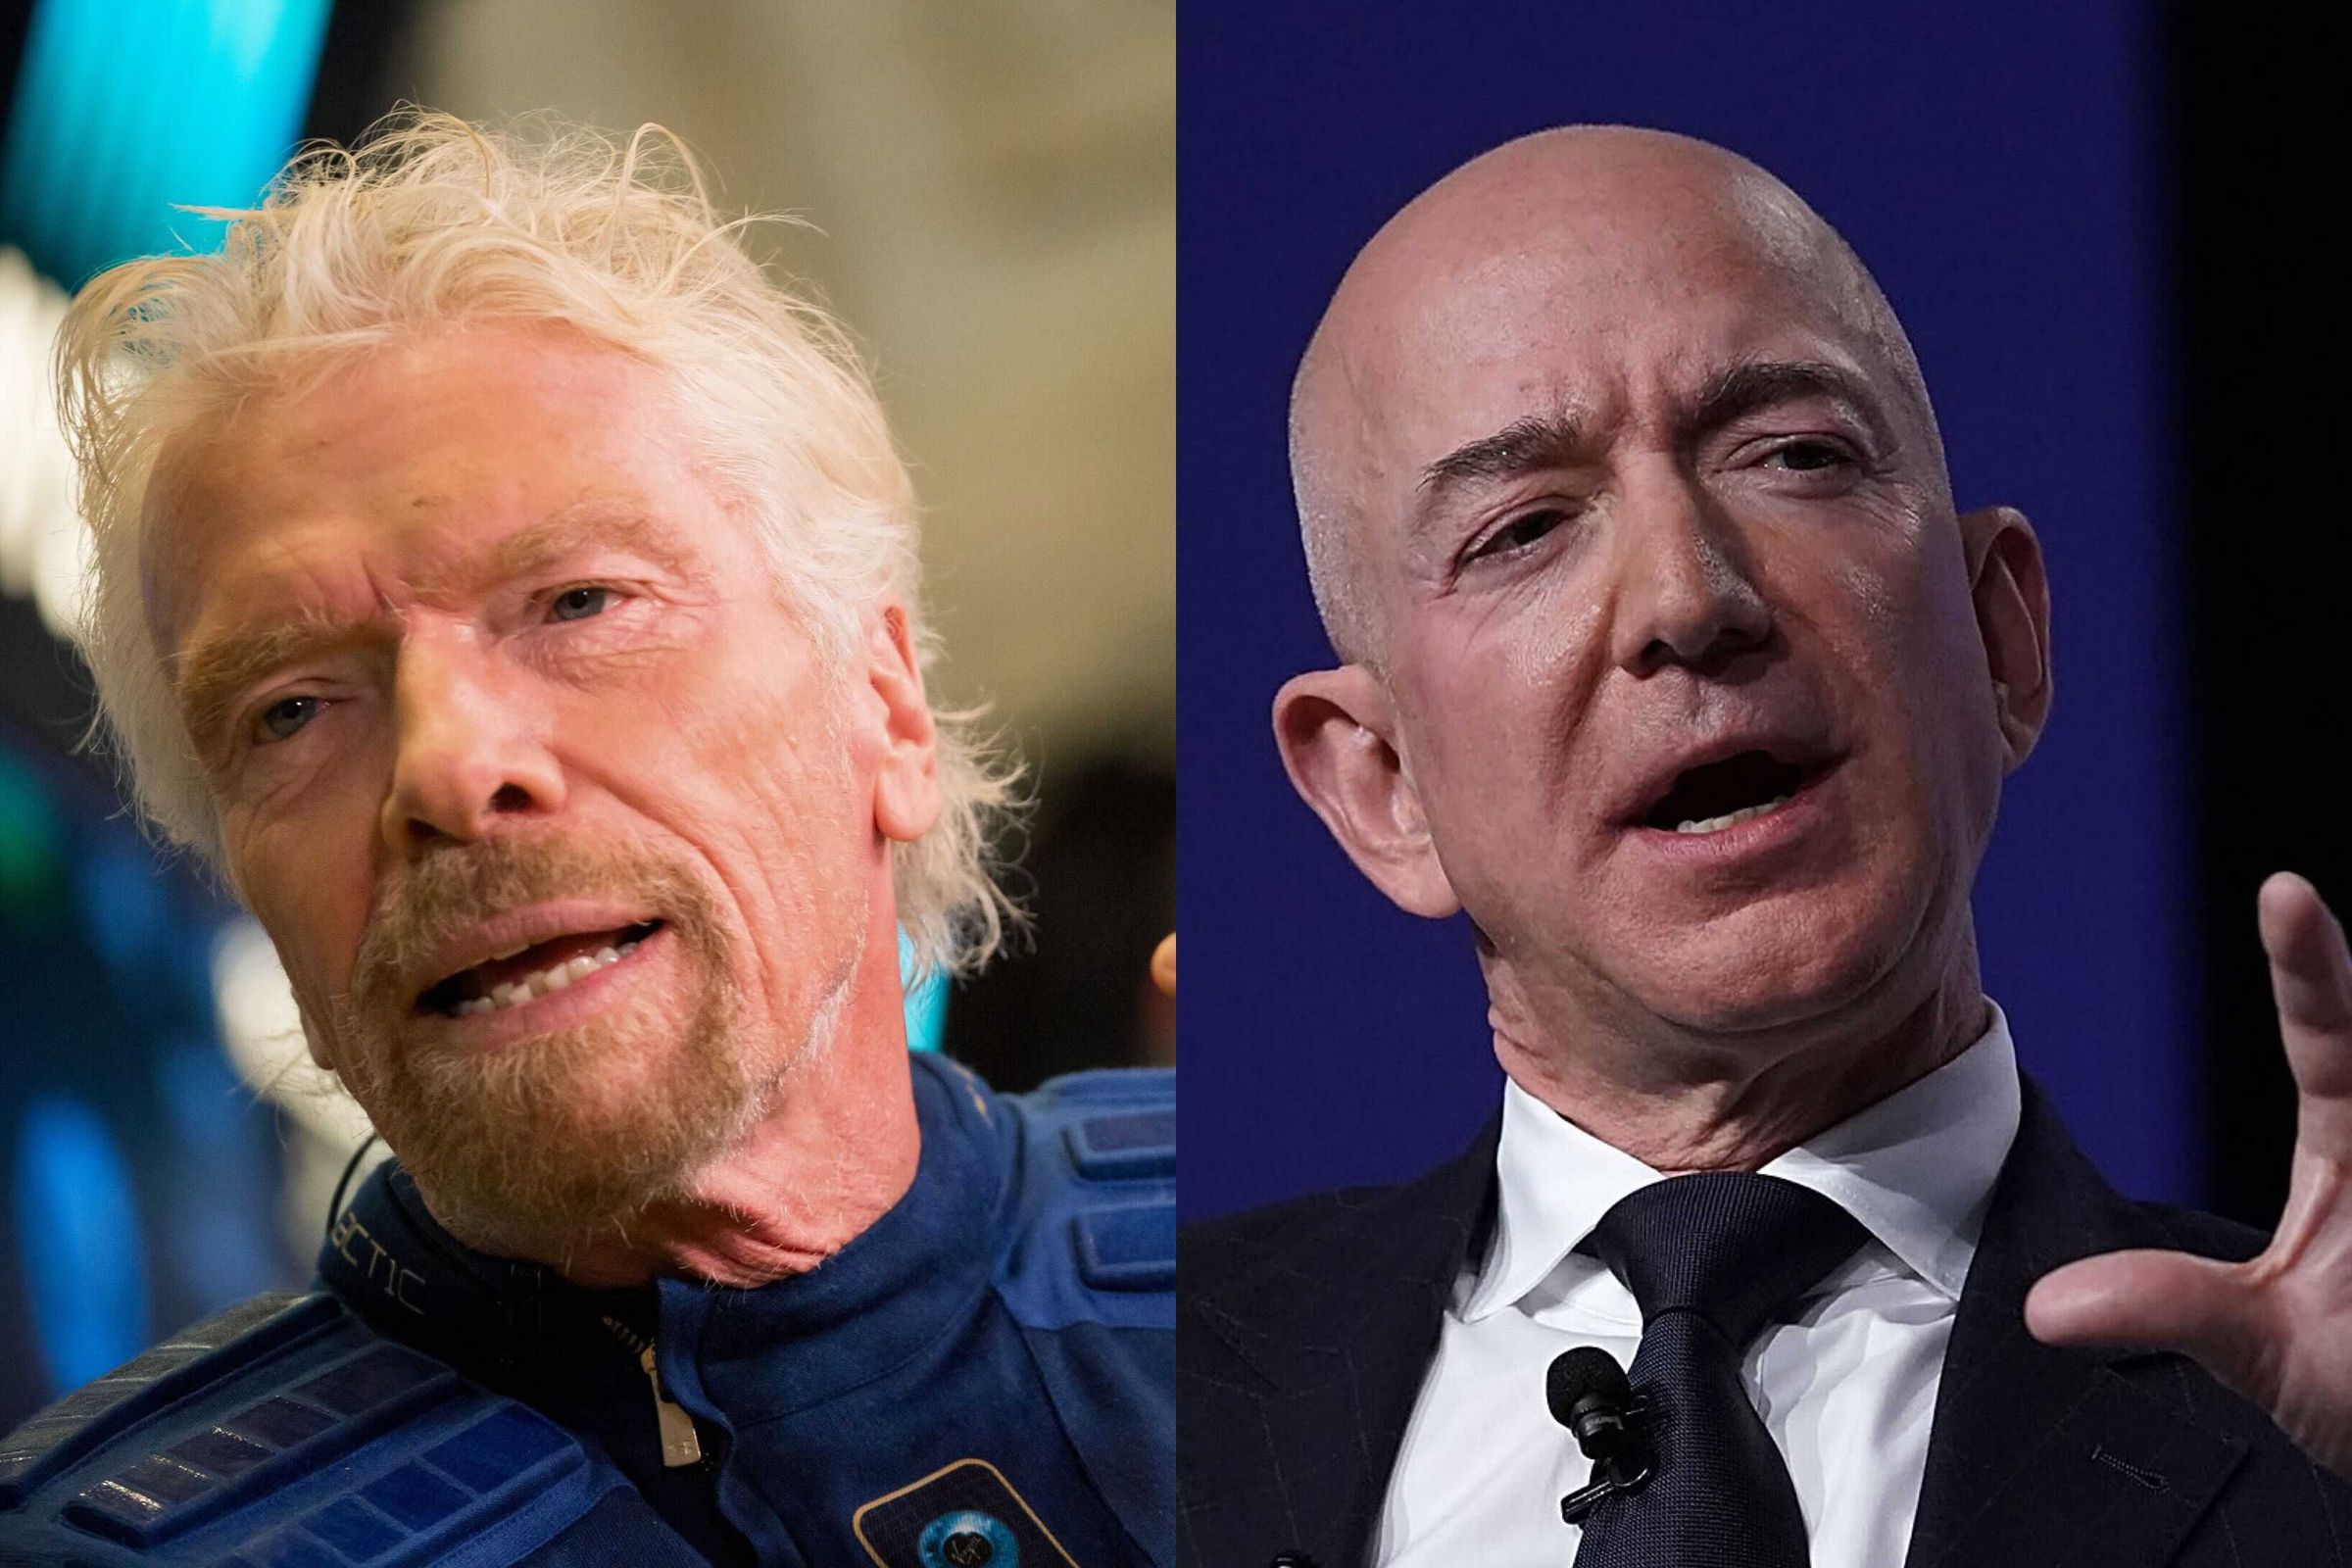 As Richard Branson (left) prepares for his flight to space, the rivalry between his space company Virgin Galactic and Blue Origin, owned byJeff Bezos (right) is heating up.